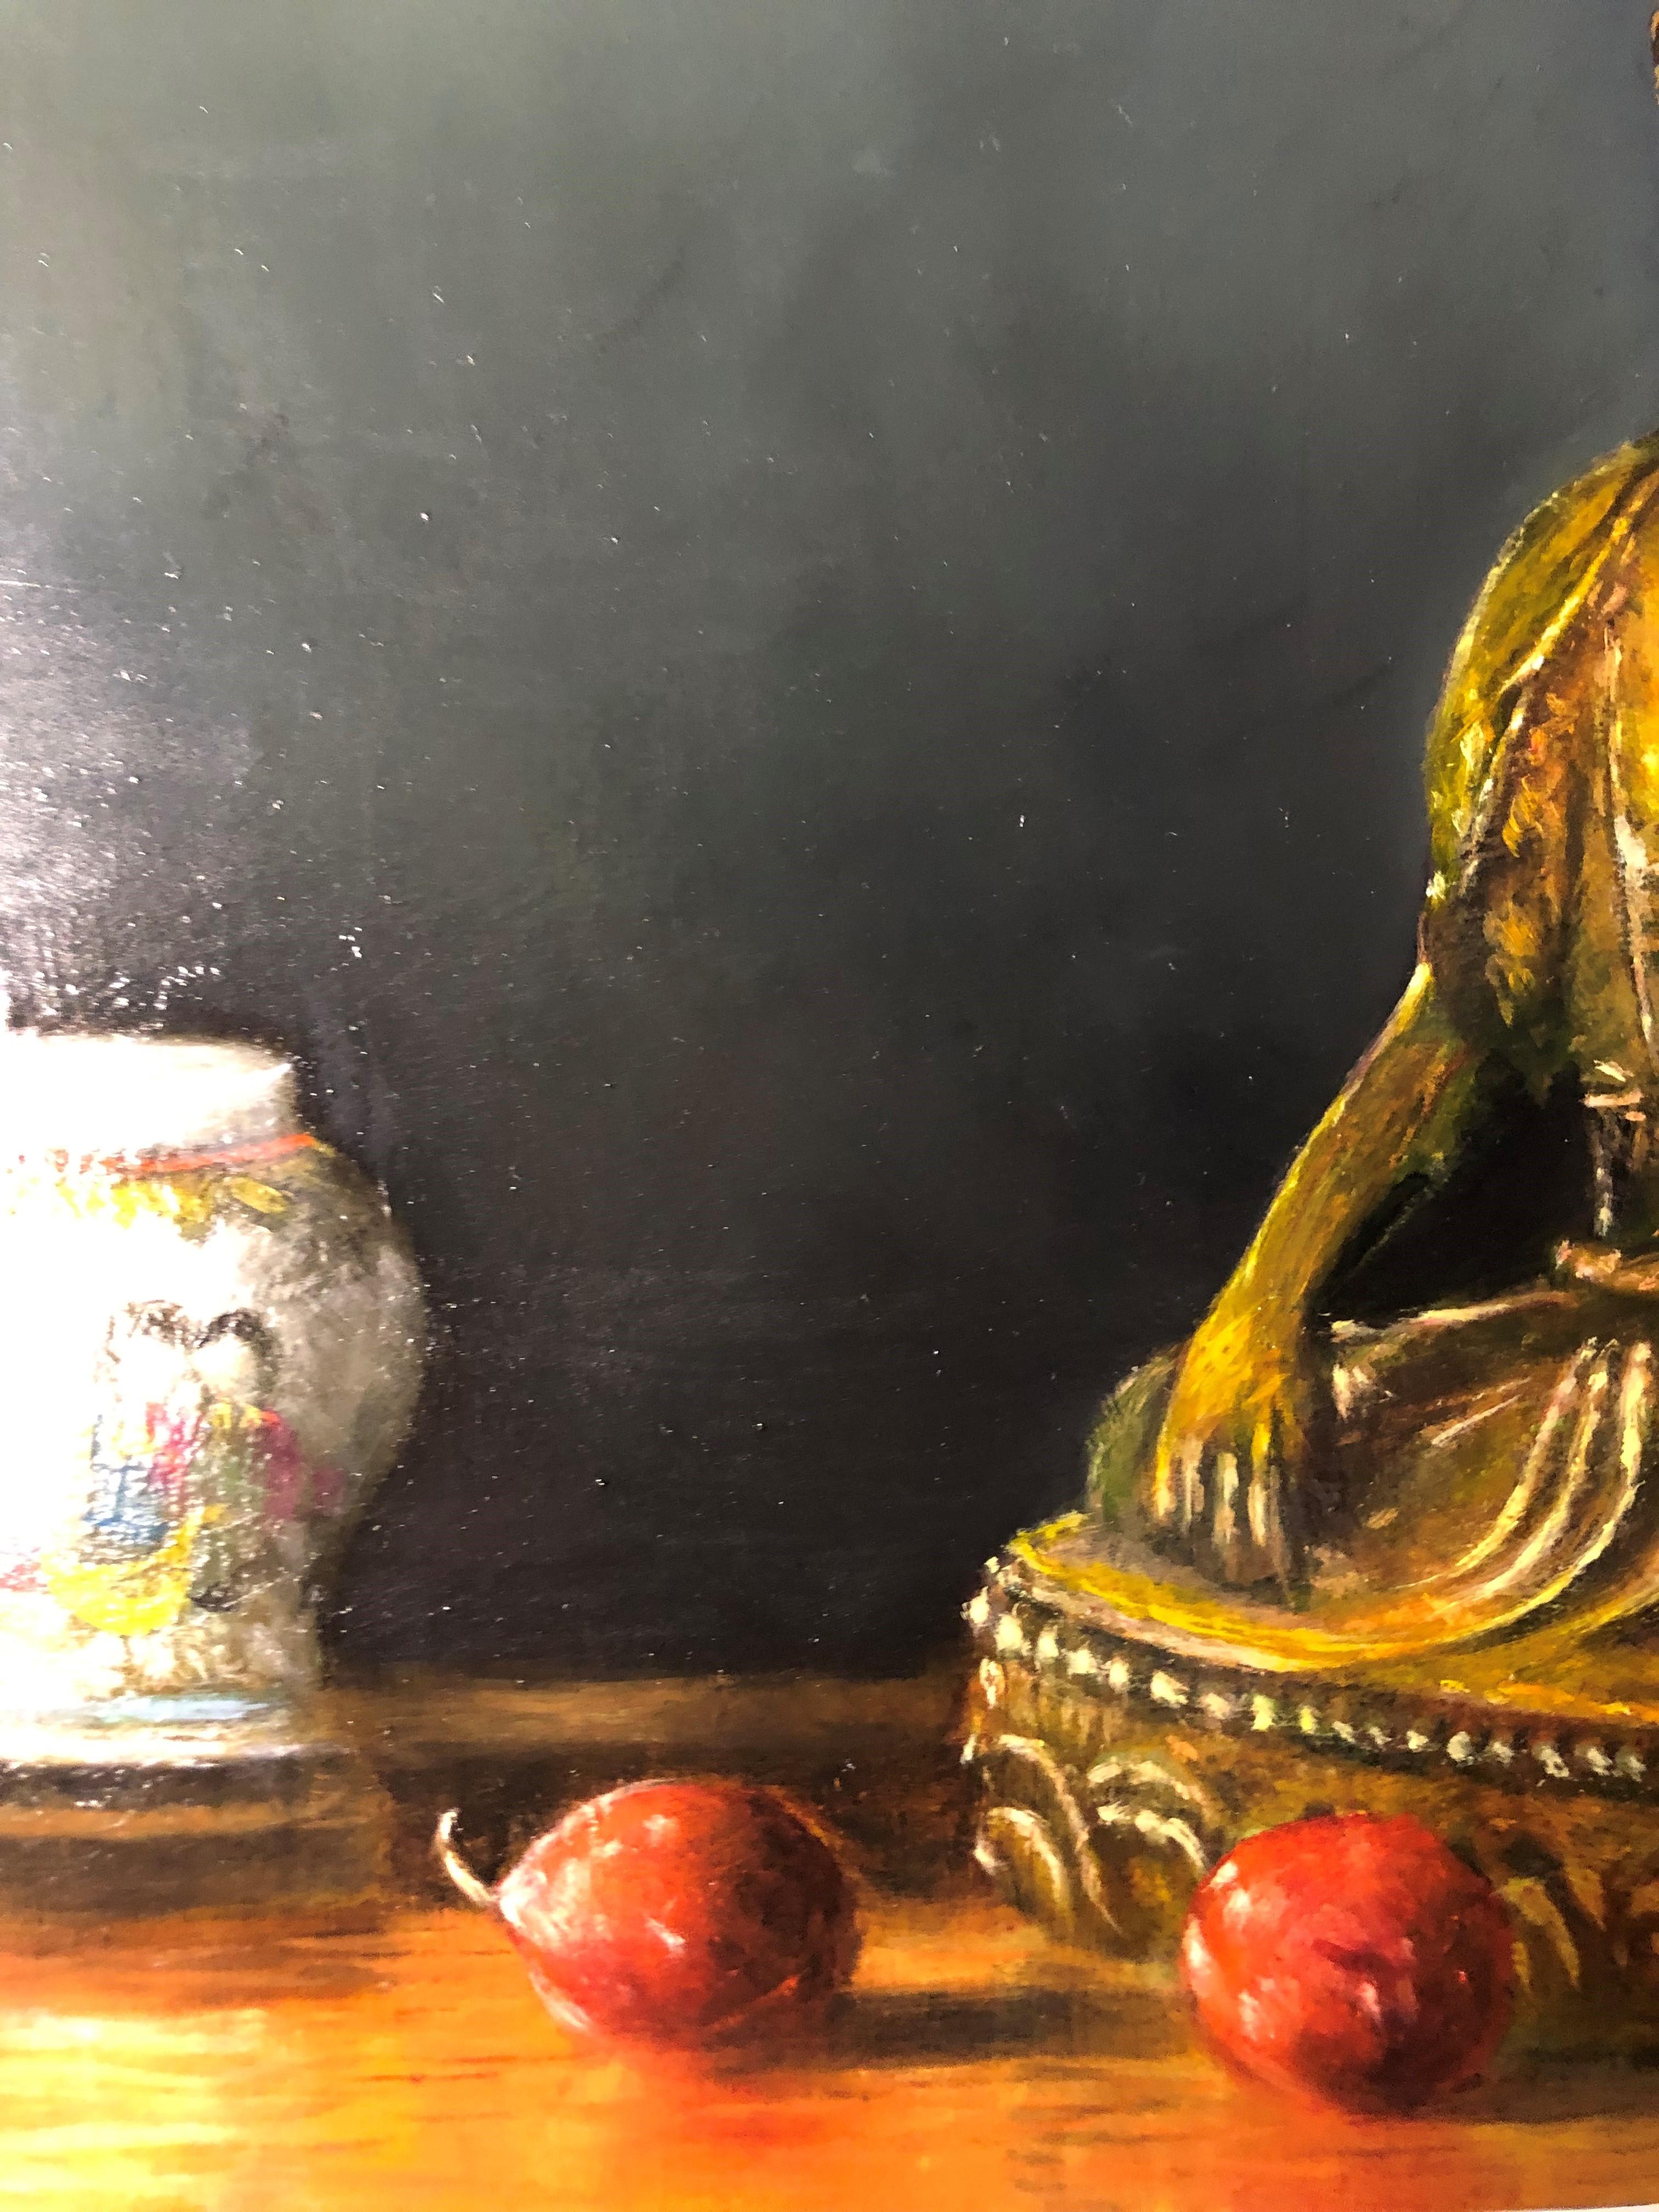 Asian Vase and Passionfruit by Nick Young is a still life study of objects. The painter captures the brass tones of the statues and contrasts them to the white porcelain. The painting strays from the traditional still life subject but maintains tone